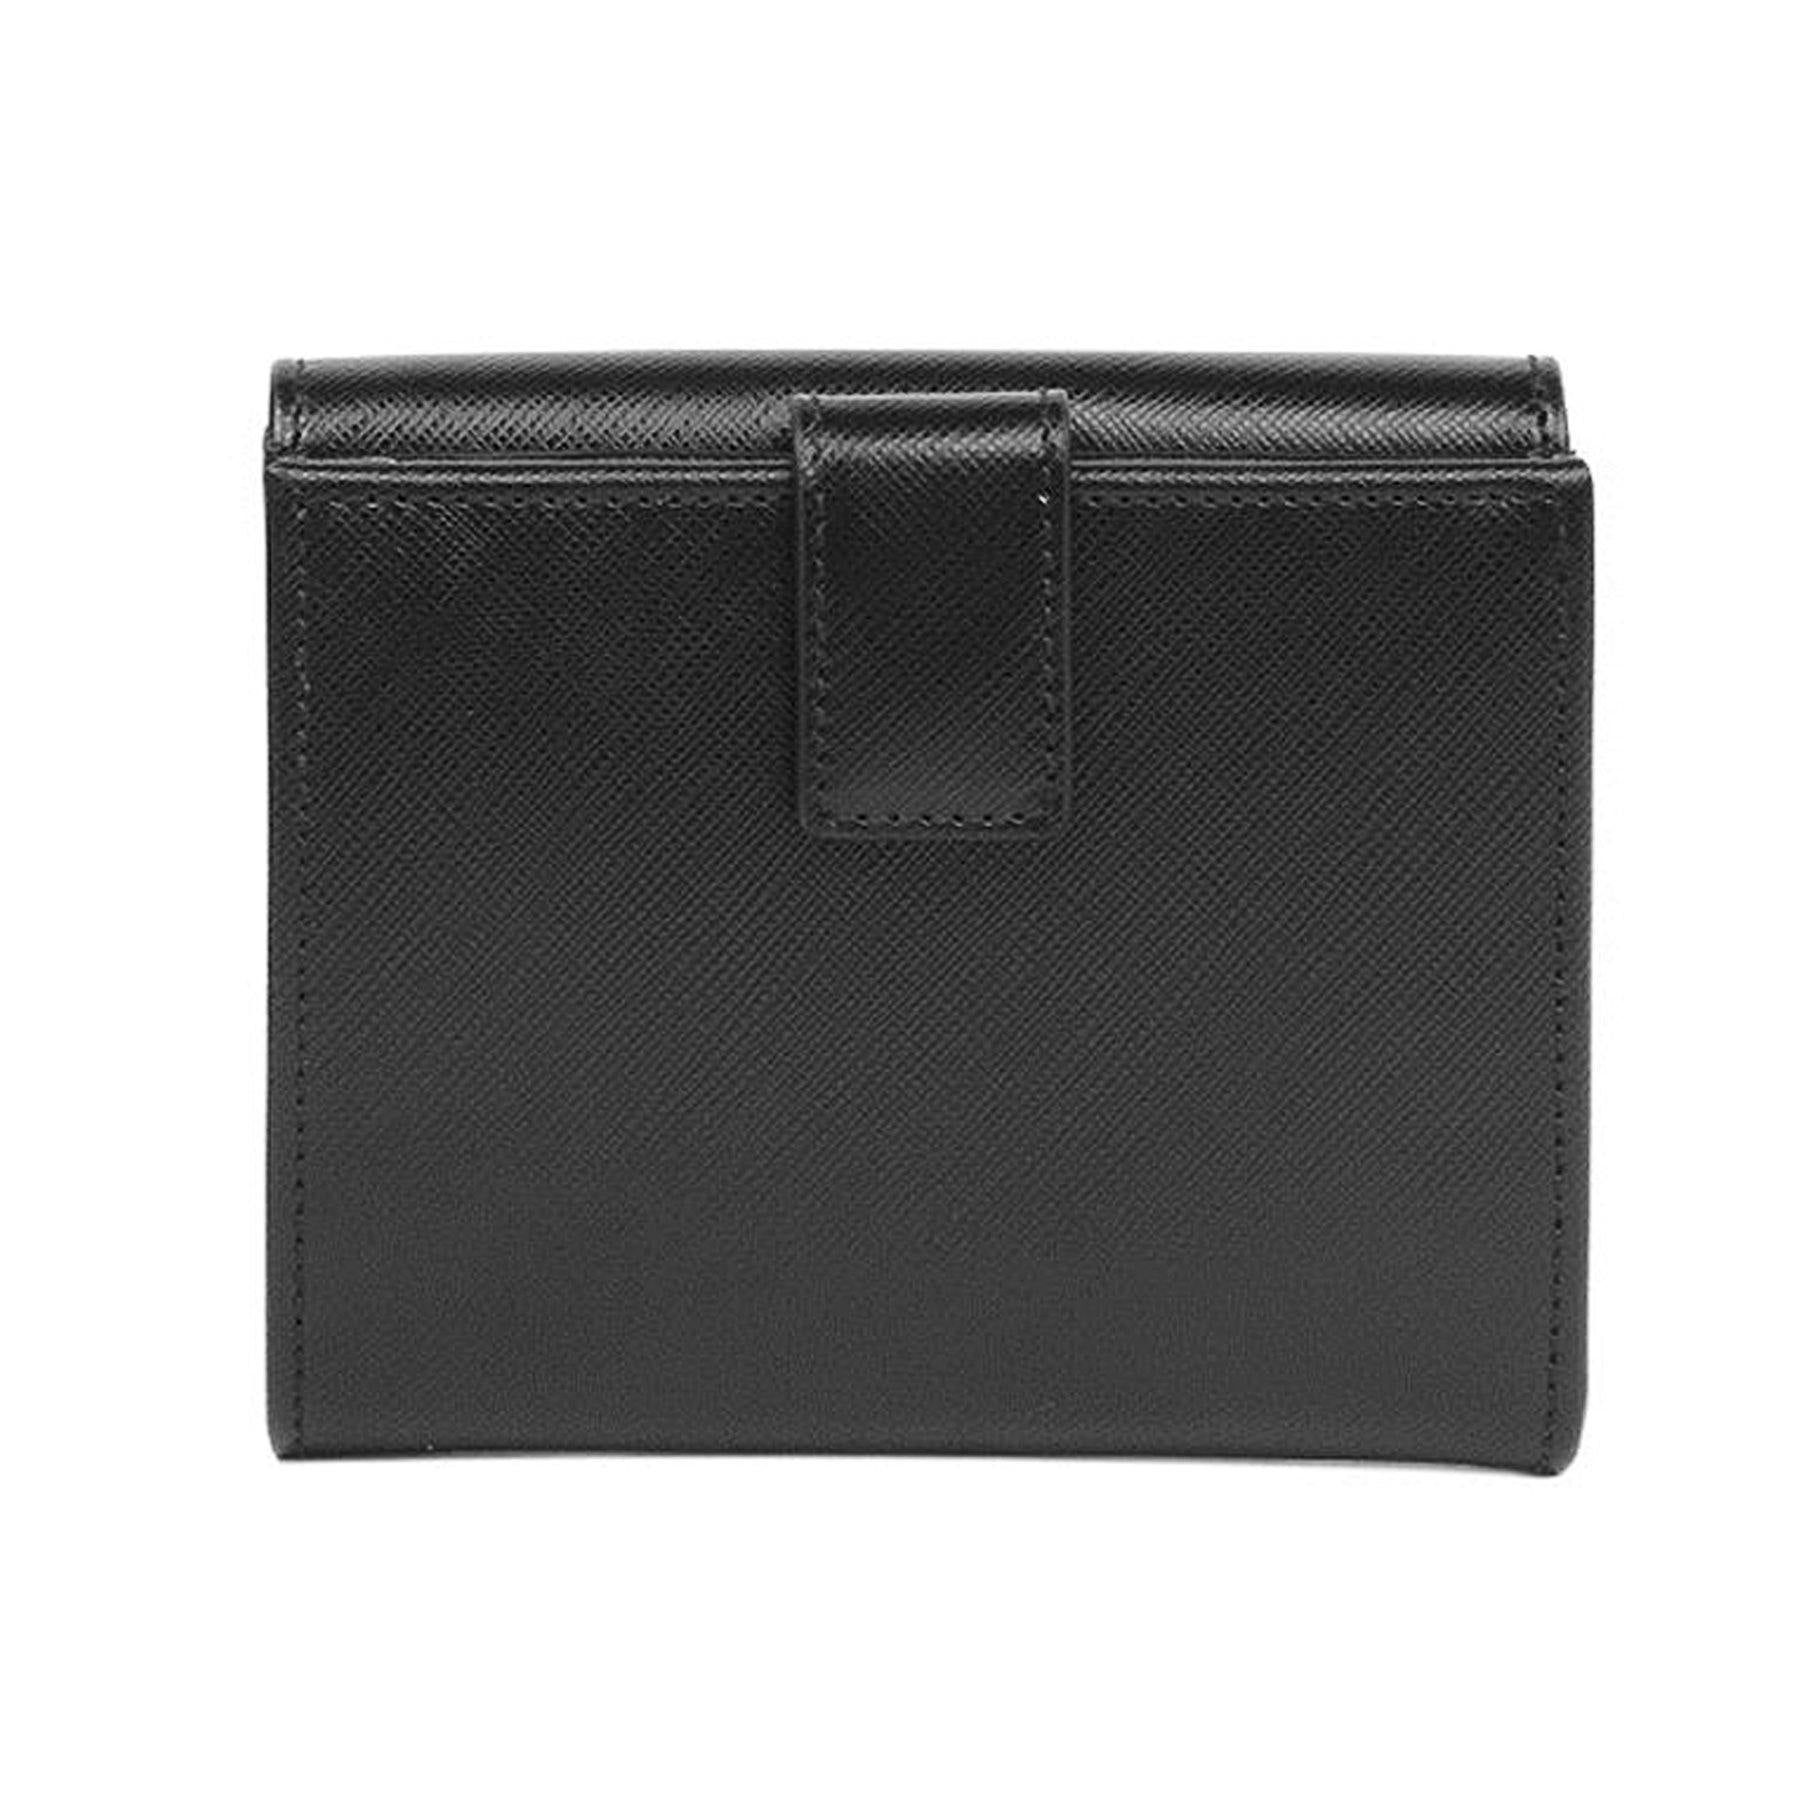 Gancini French Wallet 22 4639 - Cosmos Boutique New Jersey